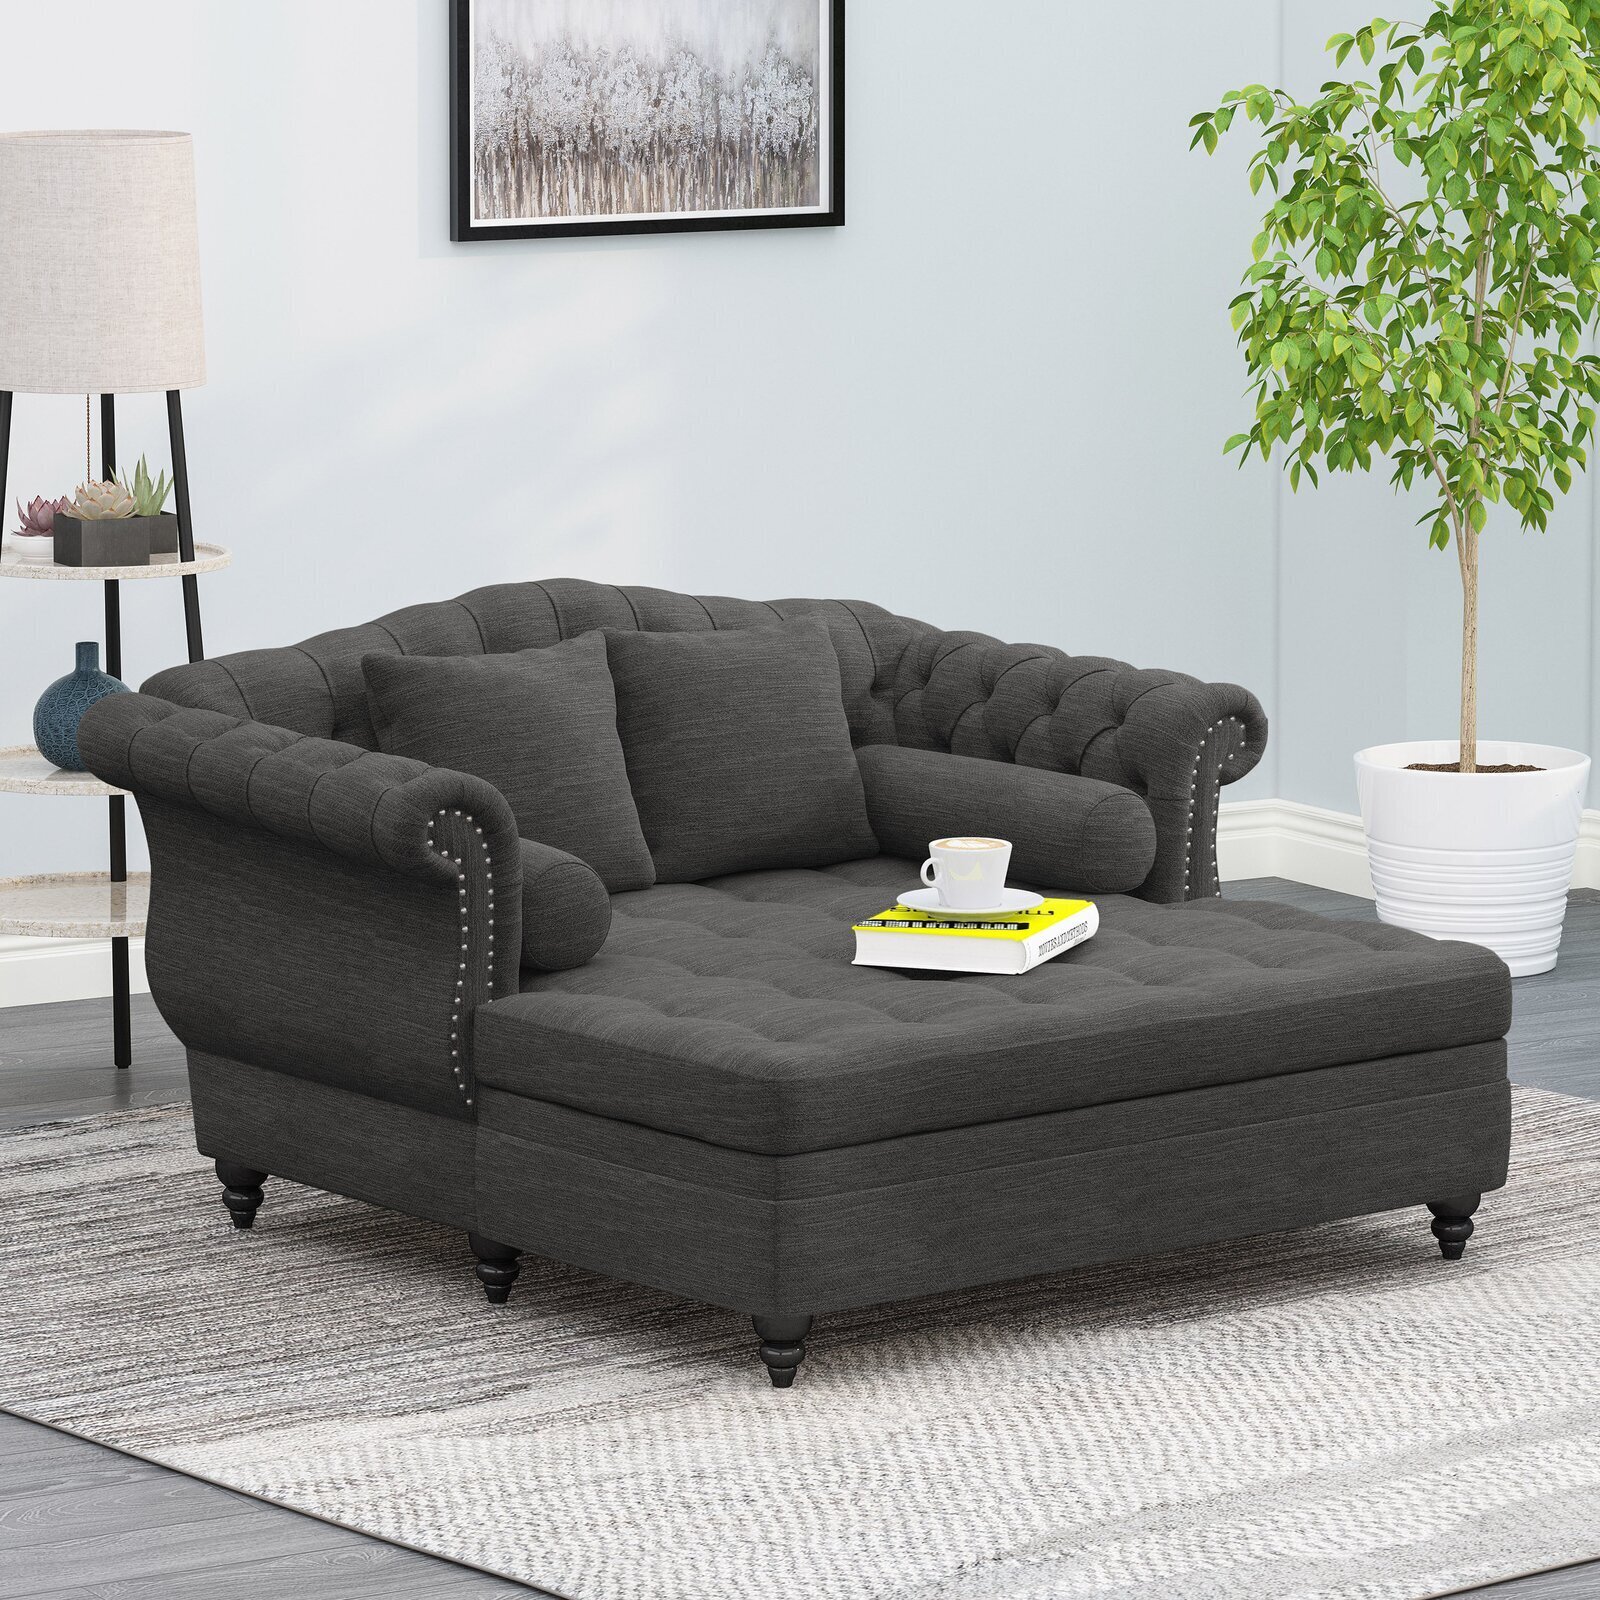 Button Tufted 2 Person Chaise Lounge